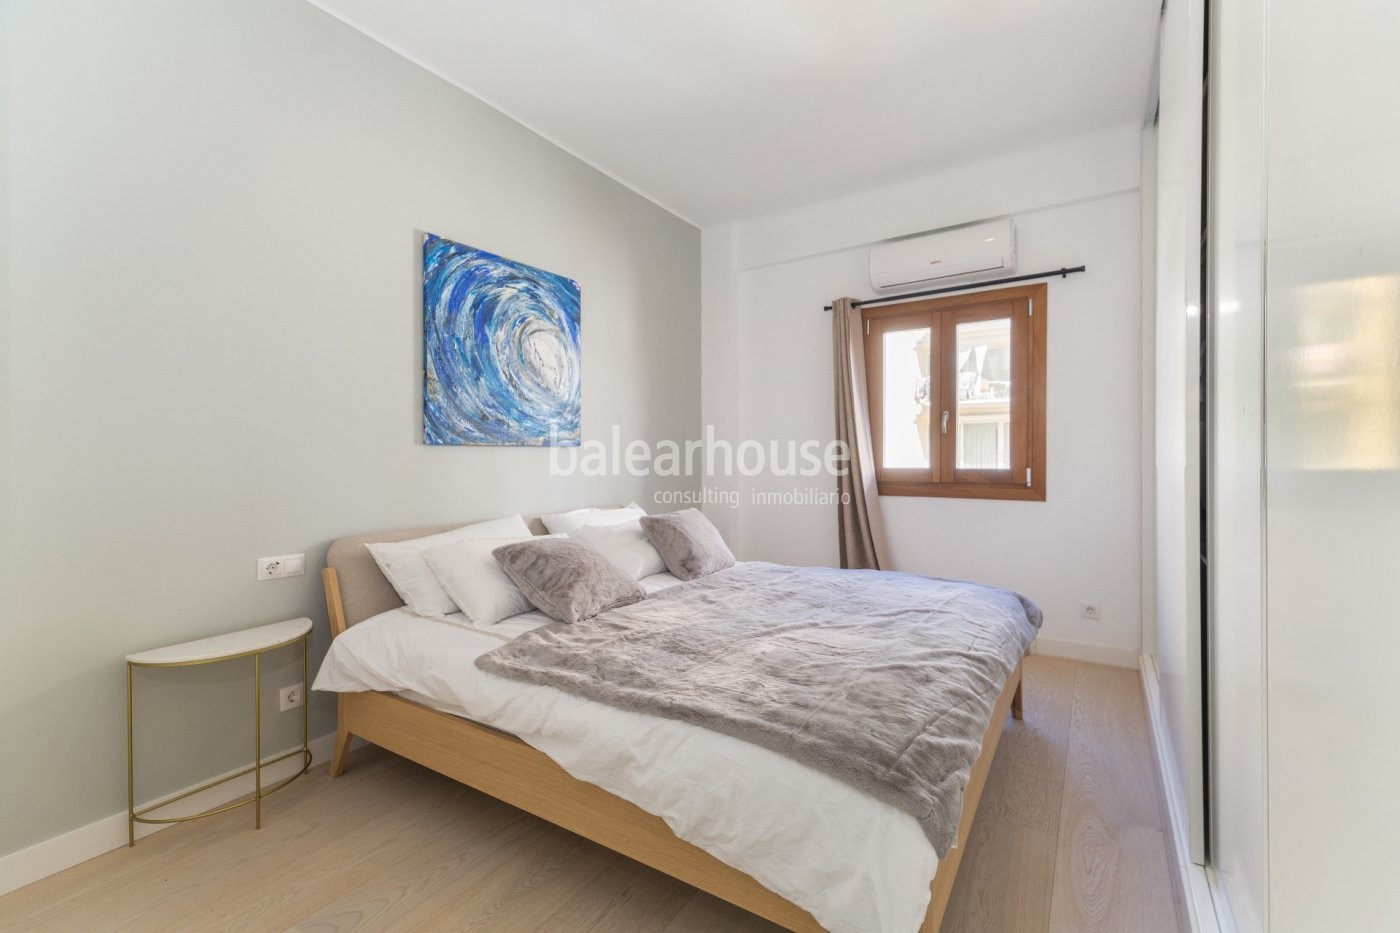 Completely refurbished apartment in a quiet street in Santa Catalina